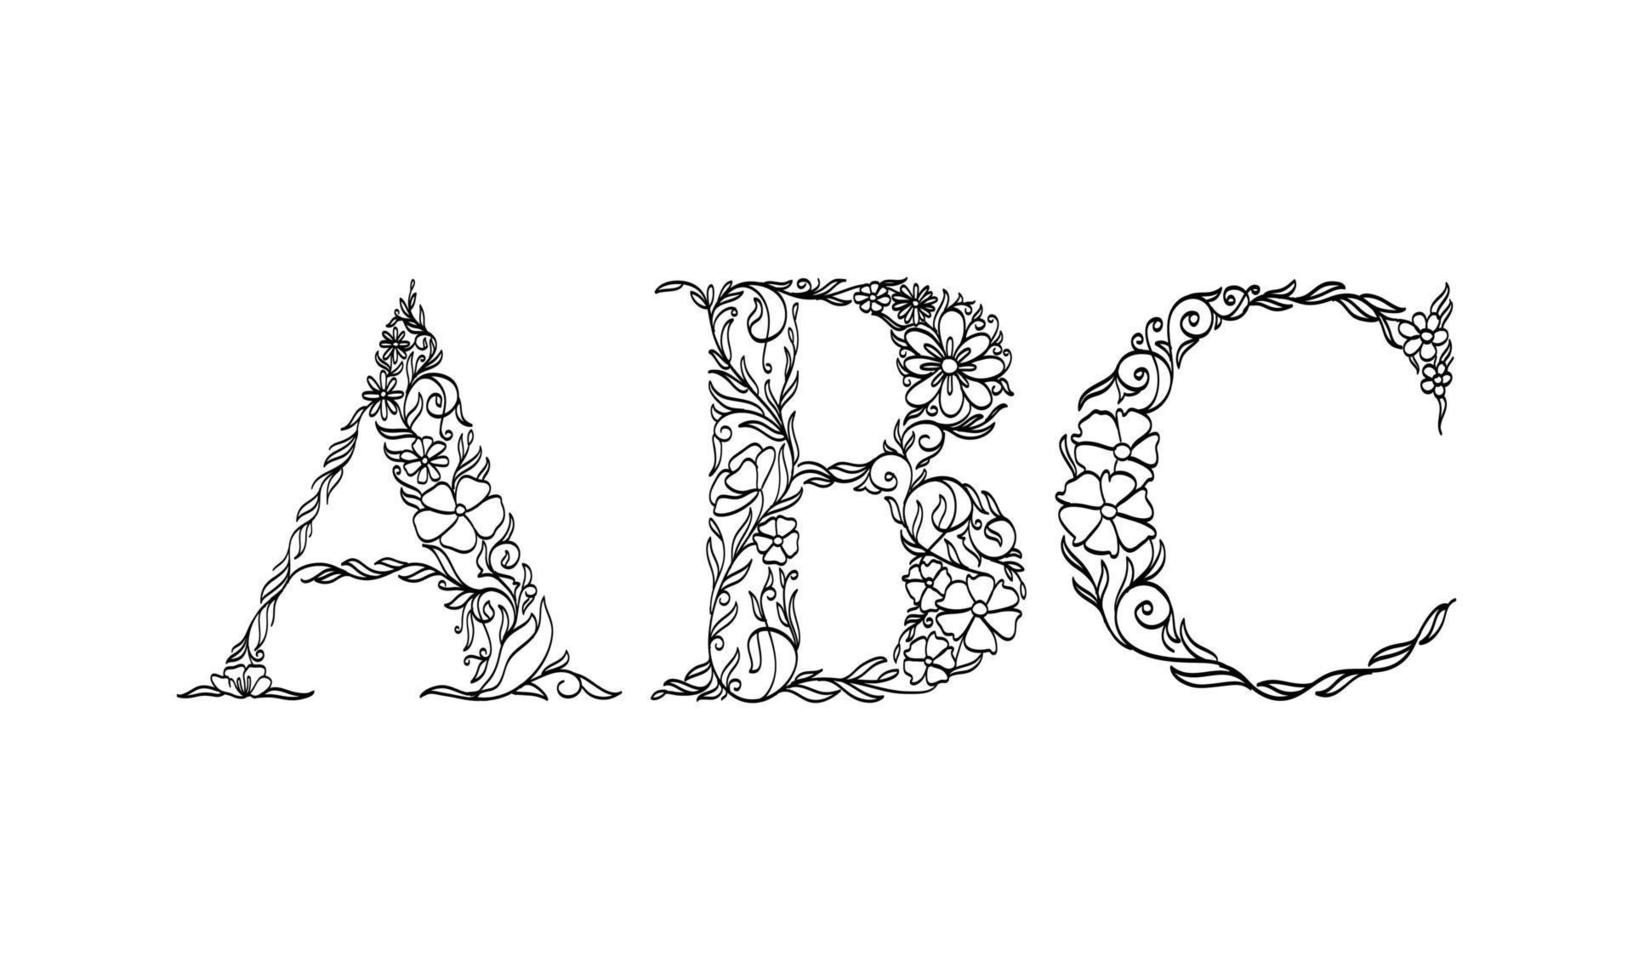 floral illustration alphabet a, b, c, vector graphic font made by flower and leaf plant creative hand drawn line art for abstract and natural nature style looks in unique monochrome design decoration